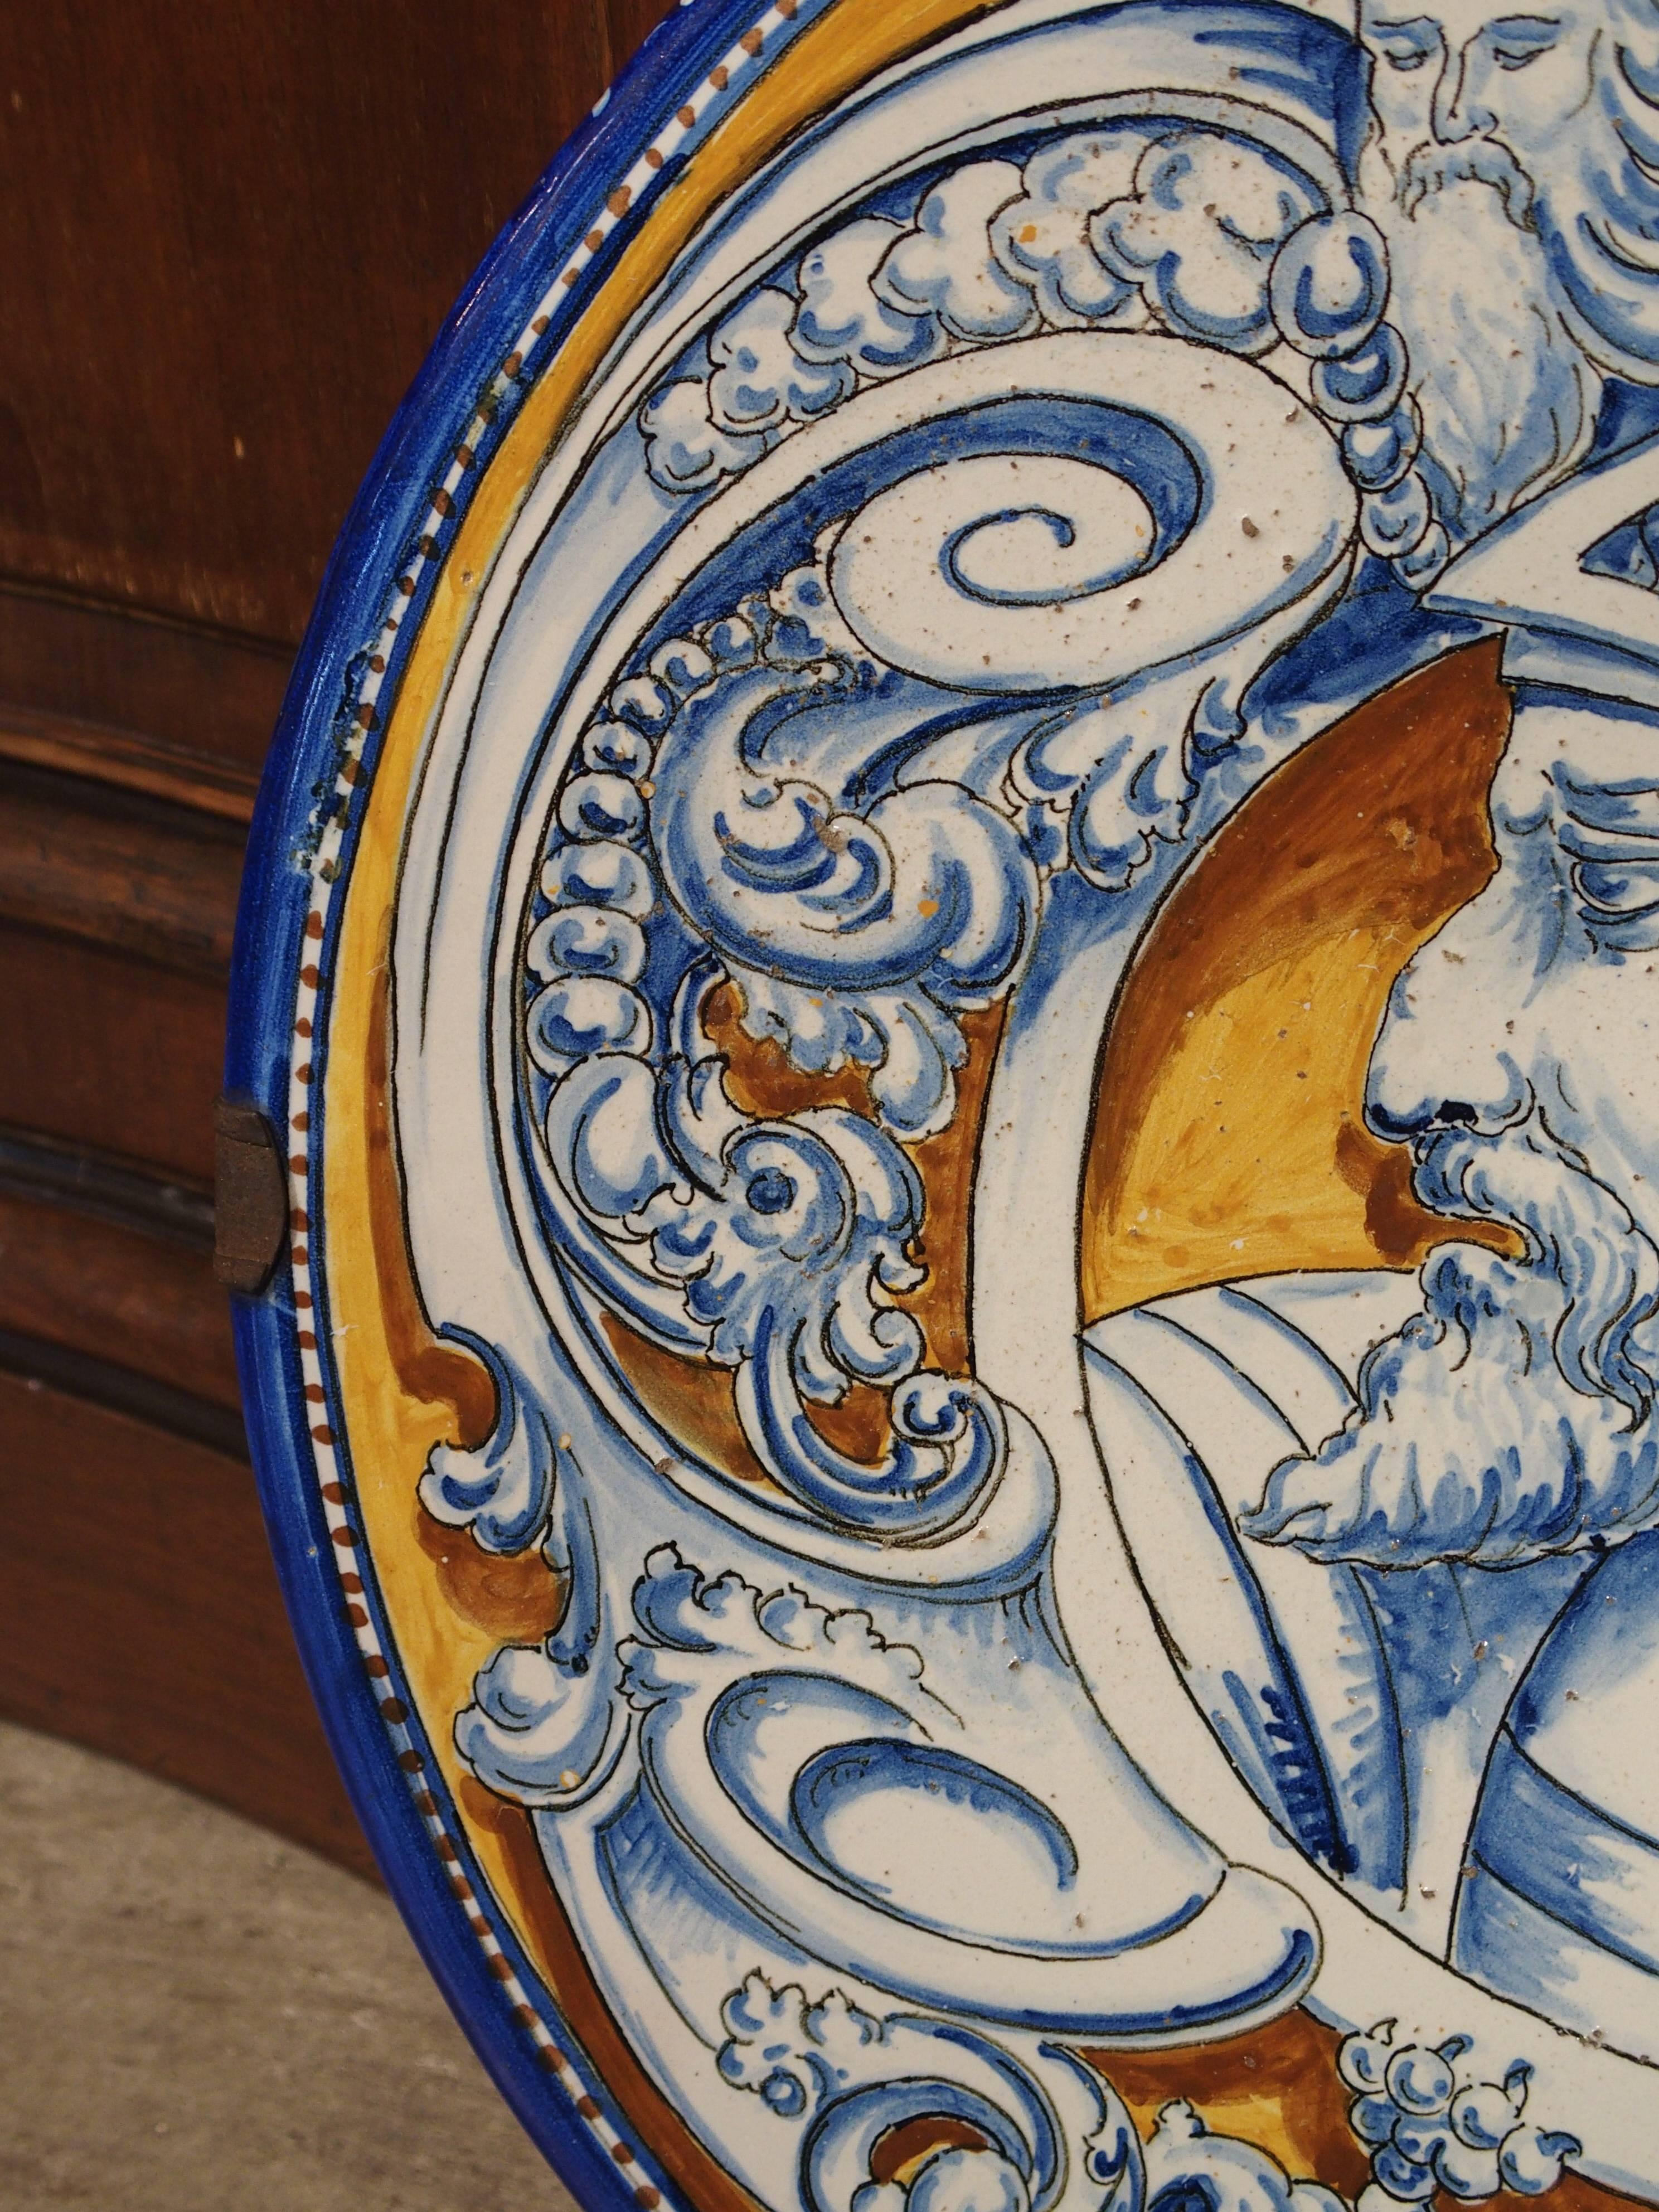 Hand-Painted Antique Renaissance Style Platter from Spain